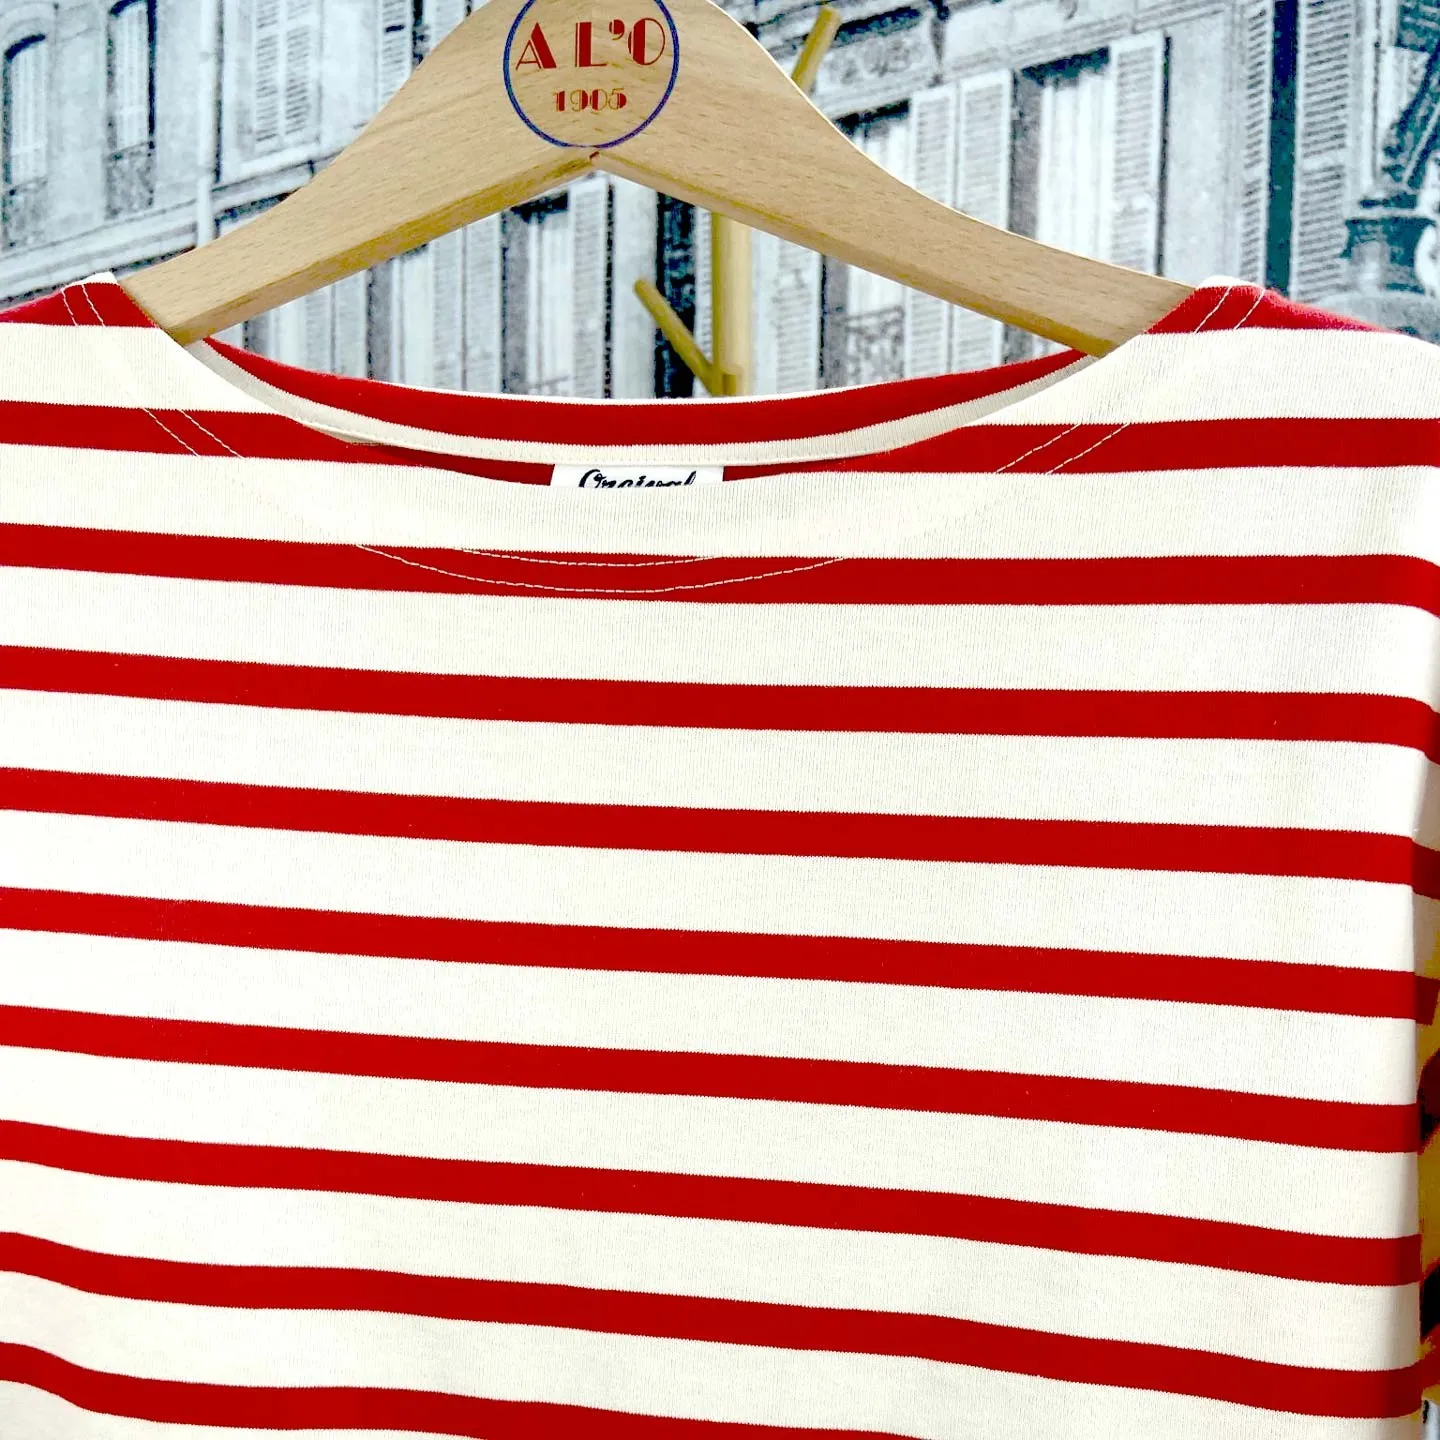 Tshirt rayé col bateau manche courte oversize Orcival White / Red